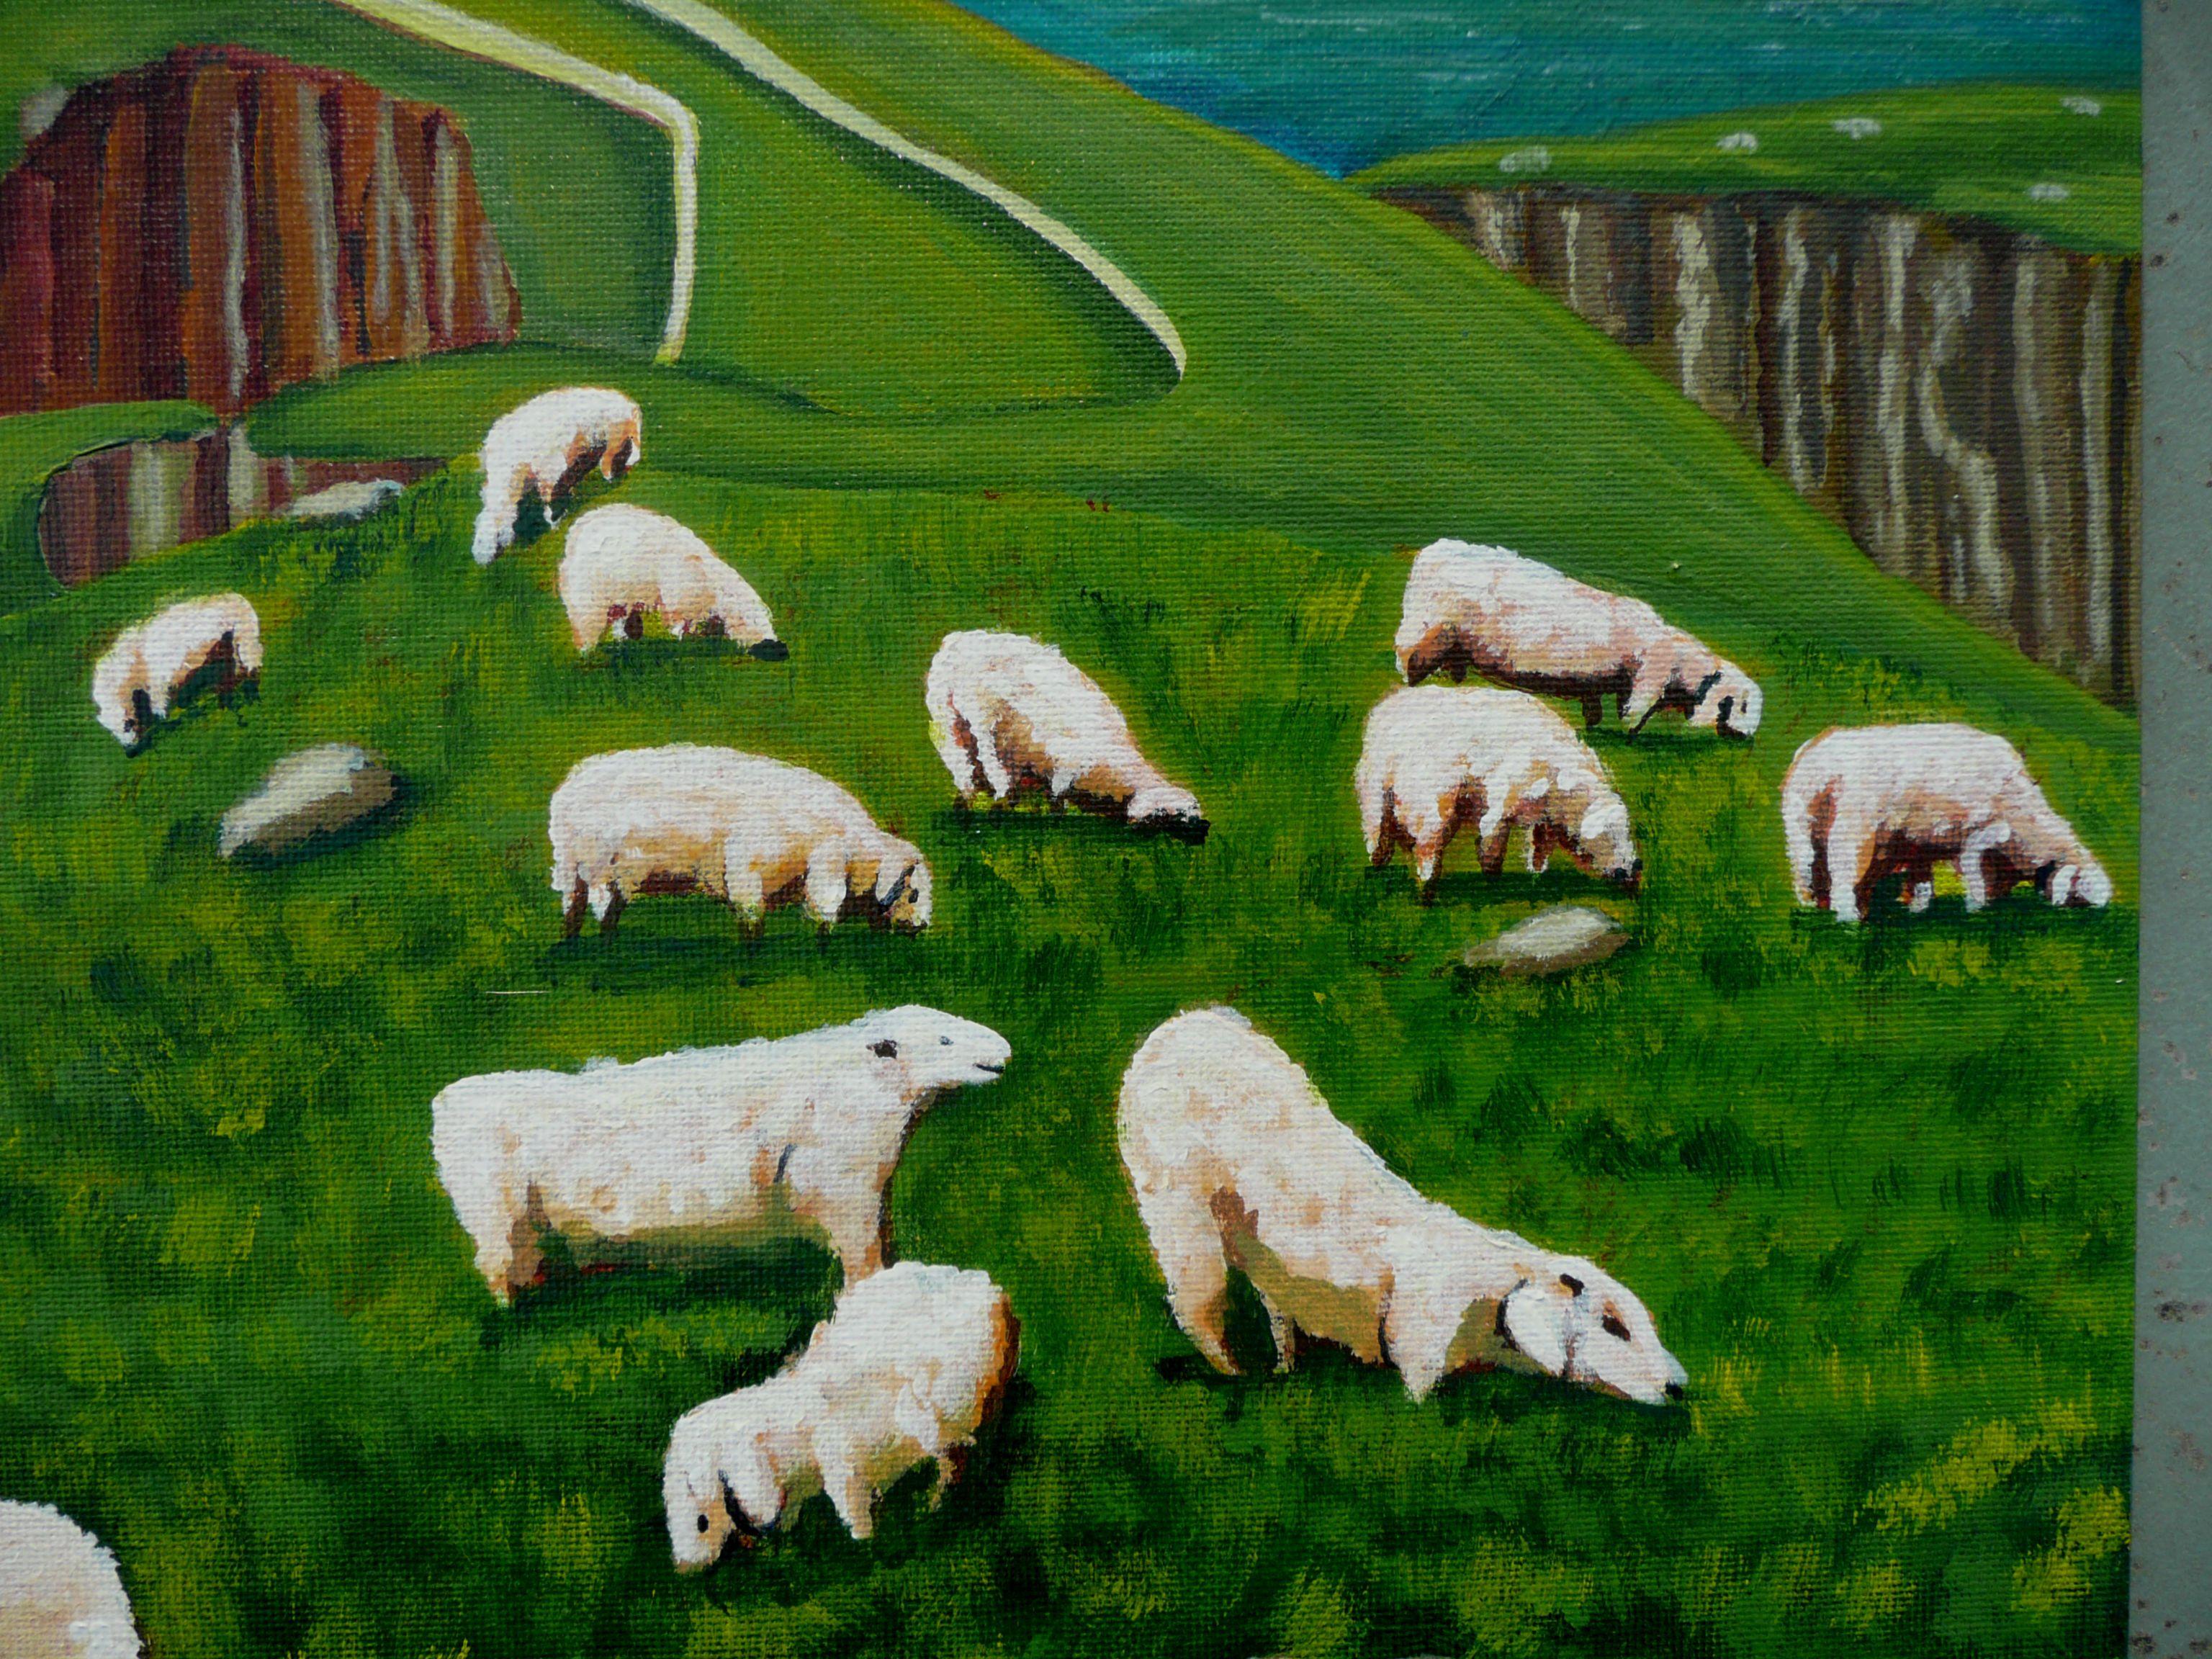 This peaceful scene of sheep grazing along the cliff strewn coast in summer is intended to relax your mind and give you serenity. The scene has been created using professional grade acrylics on flat canvas and coated with art varnish for protection